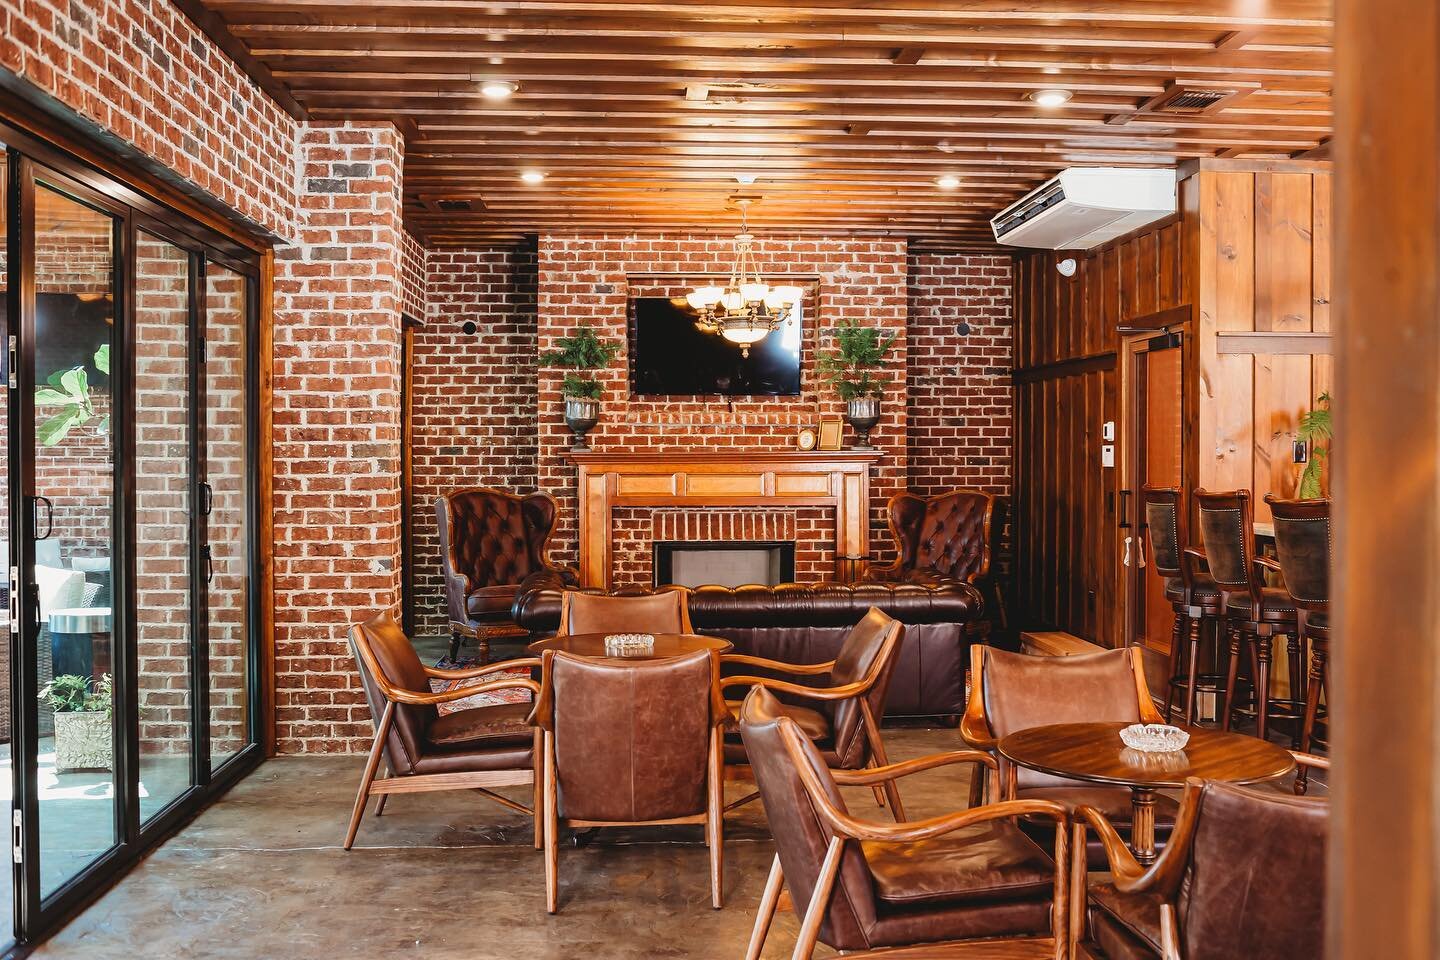 Game day is here 🏈 Come catch the game and stay a while with us!!

Who&rsquo;s everyone cheering for this weekend??

#exploregeorgia #pickellijay #ellijayga #ellijay #ellijaycigars #ellijaycigarlounge #cigarnation #cigar #cigarloungega #northgeorgia